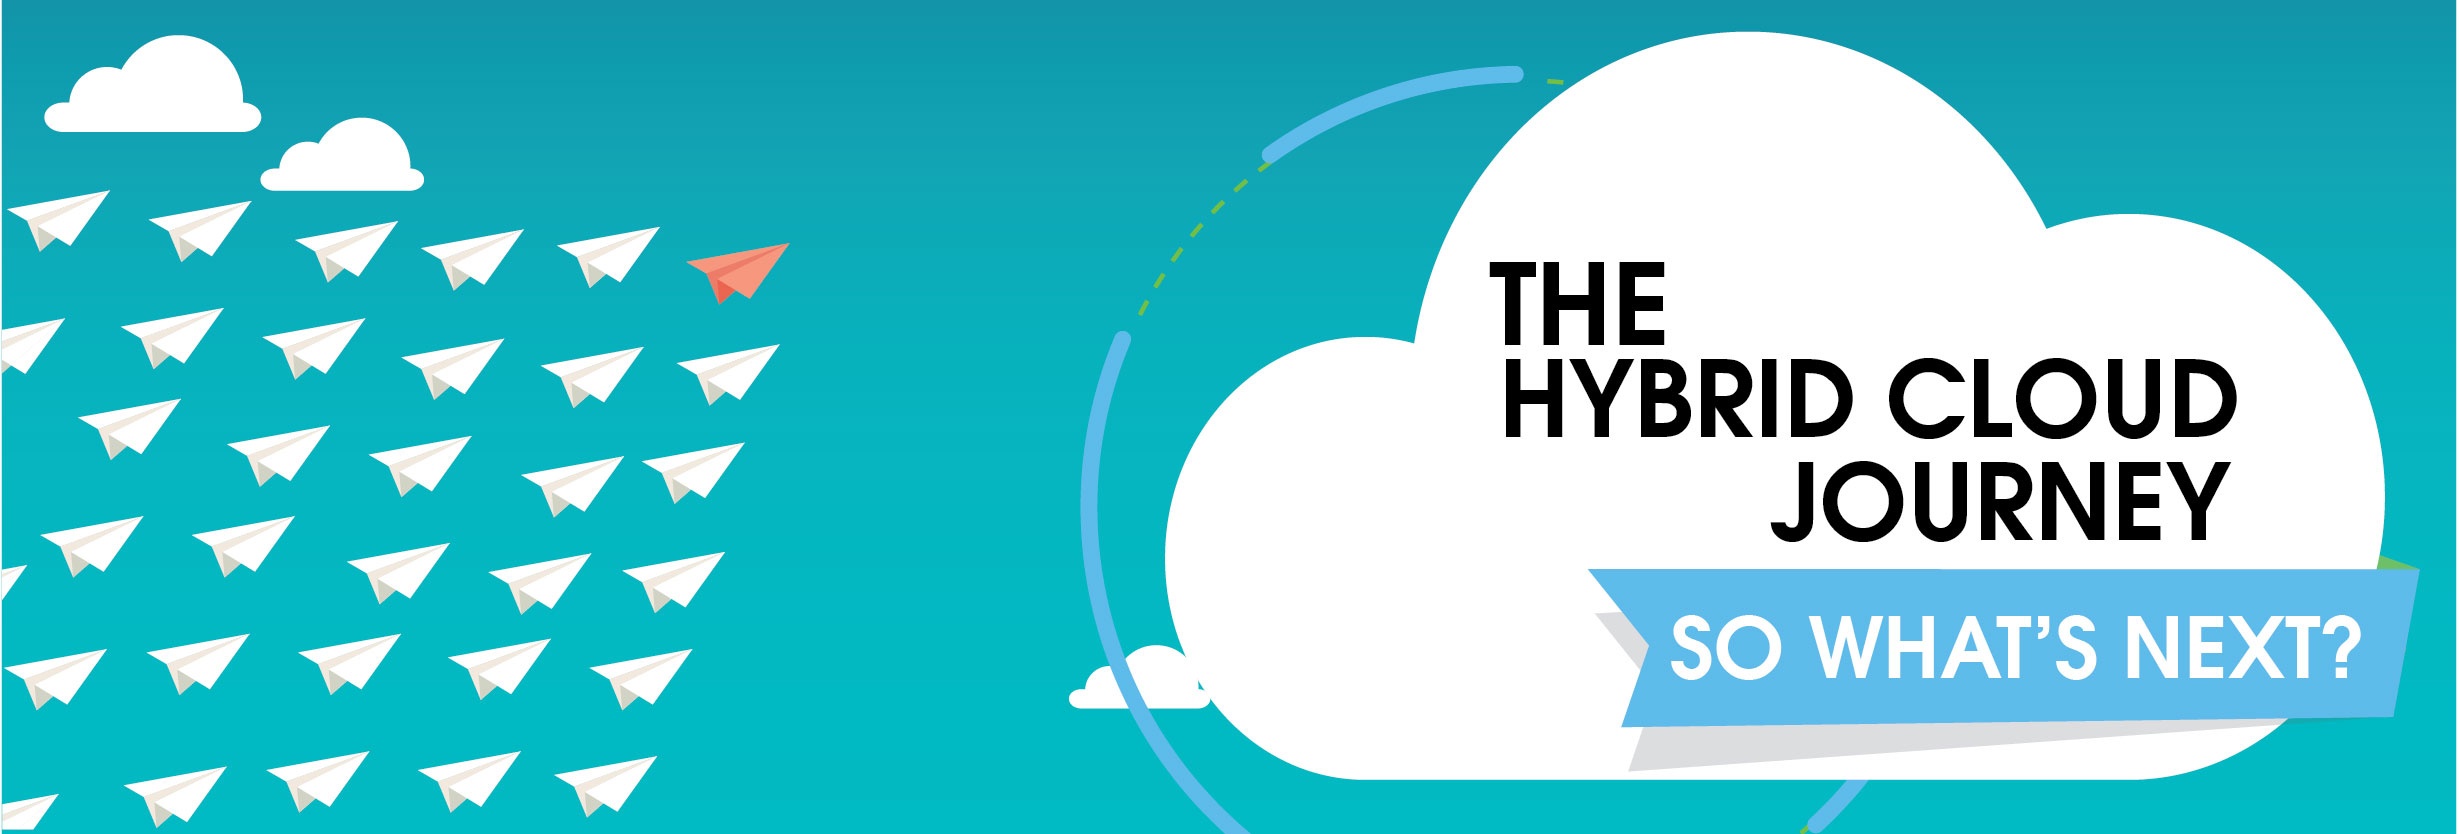 [Infographic] The Hybrid Cloud Journey: So What’s Next? (Part 1 of 2)